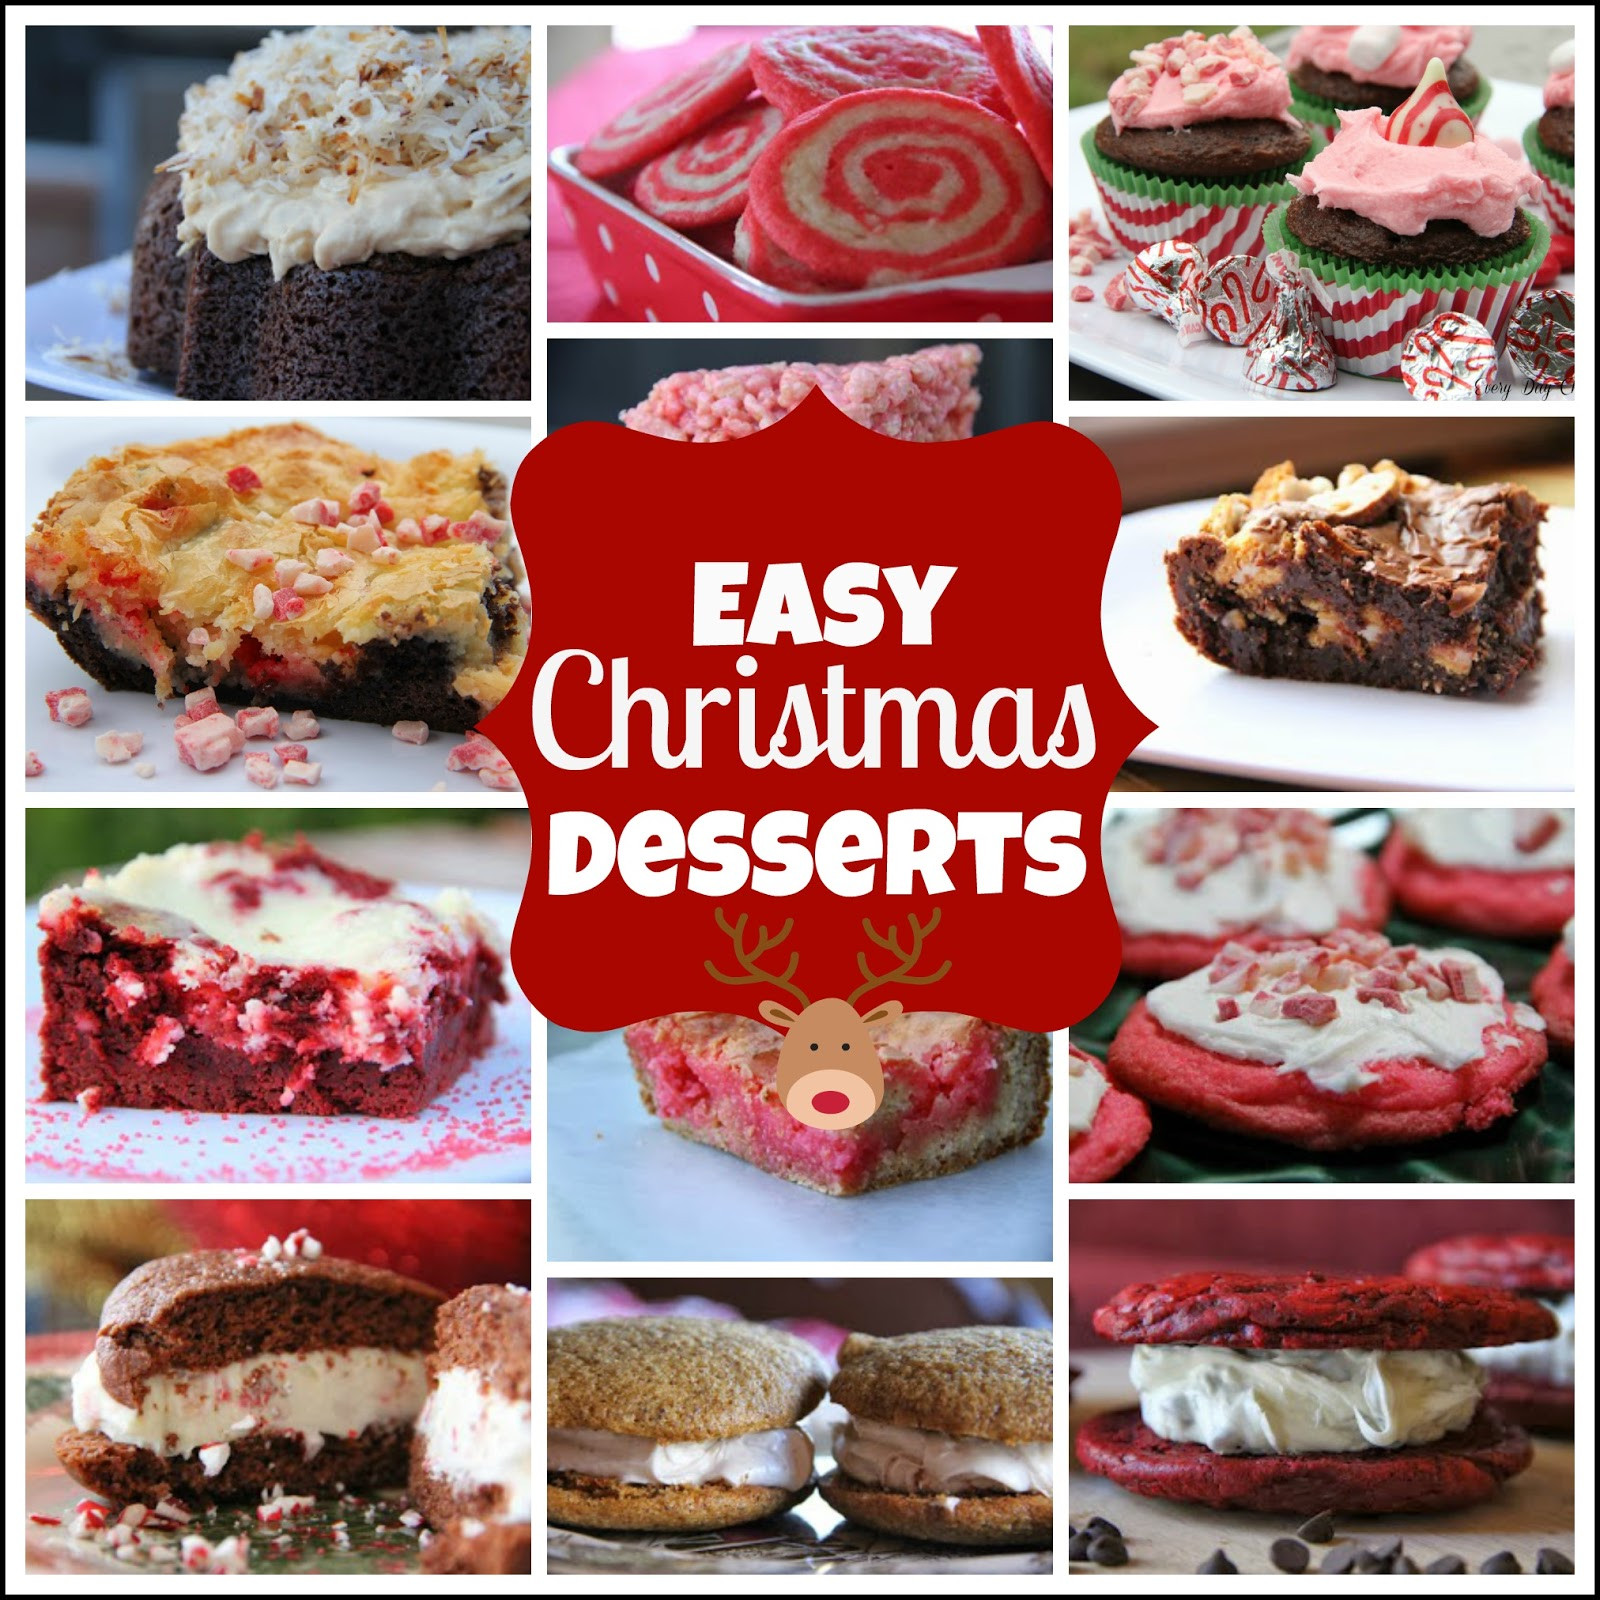 Easy Christmas Party Desserts
 Easy Christmas Desserts